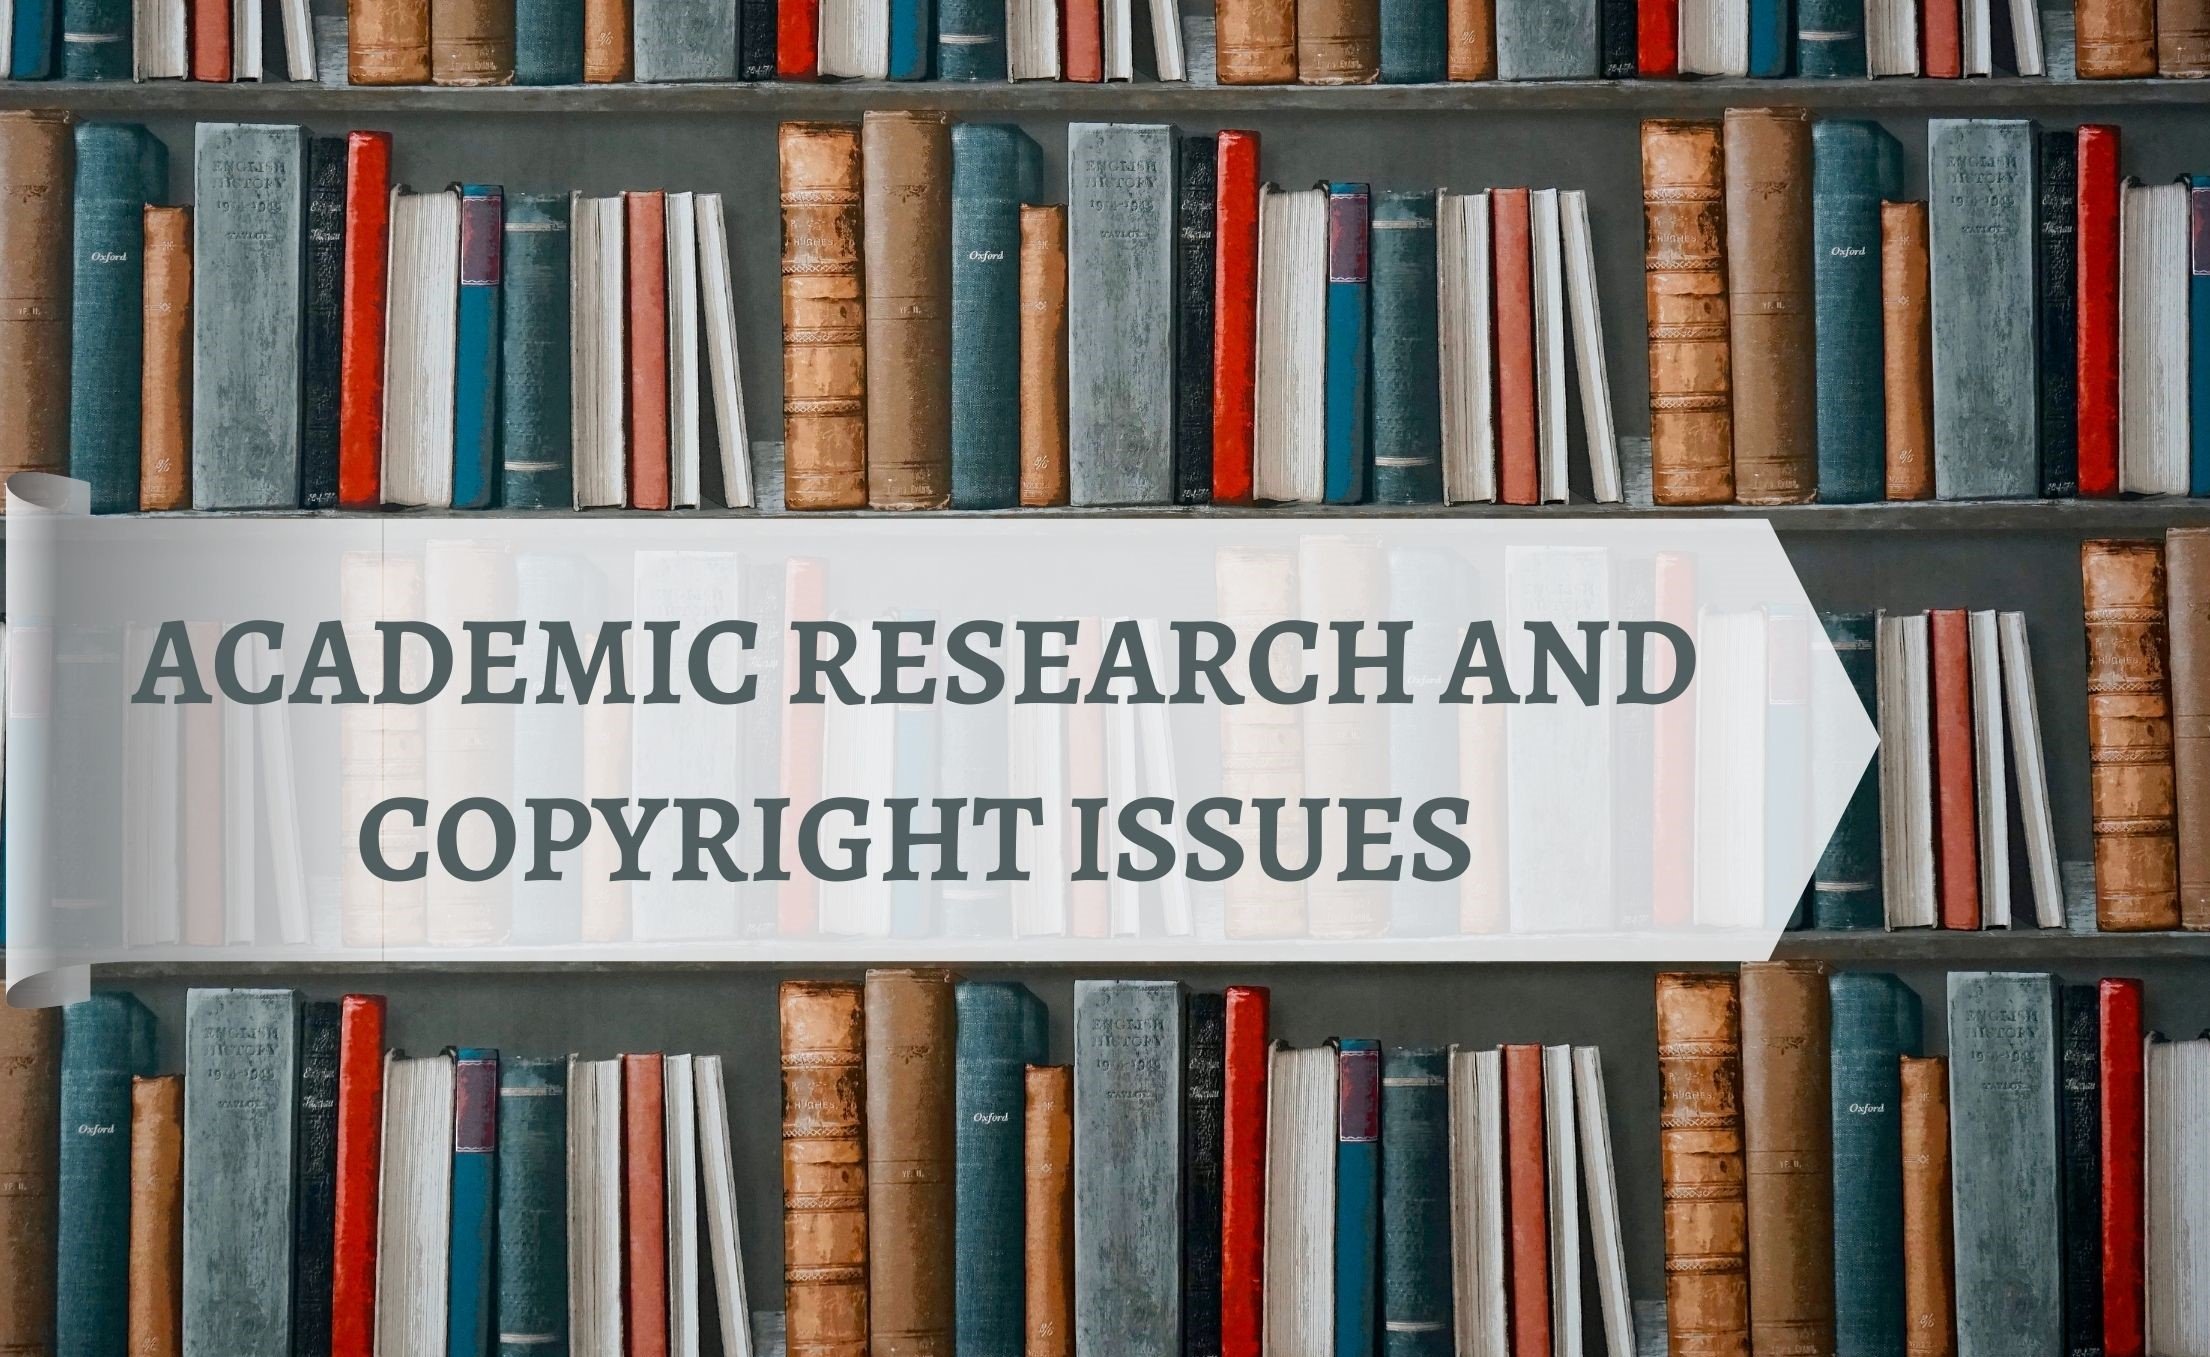 ACADEMIC RESEARCH AND COPYRIGHT ISSUES